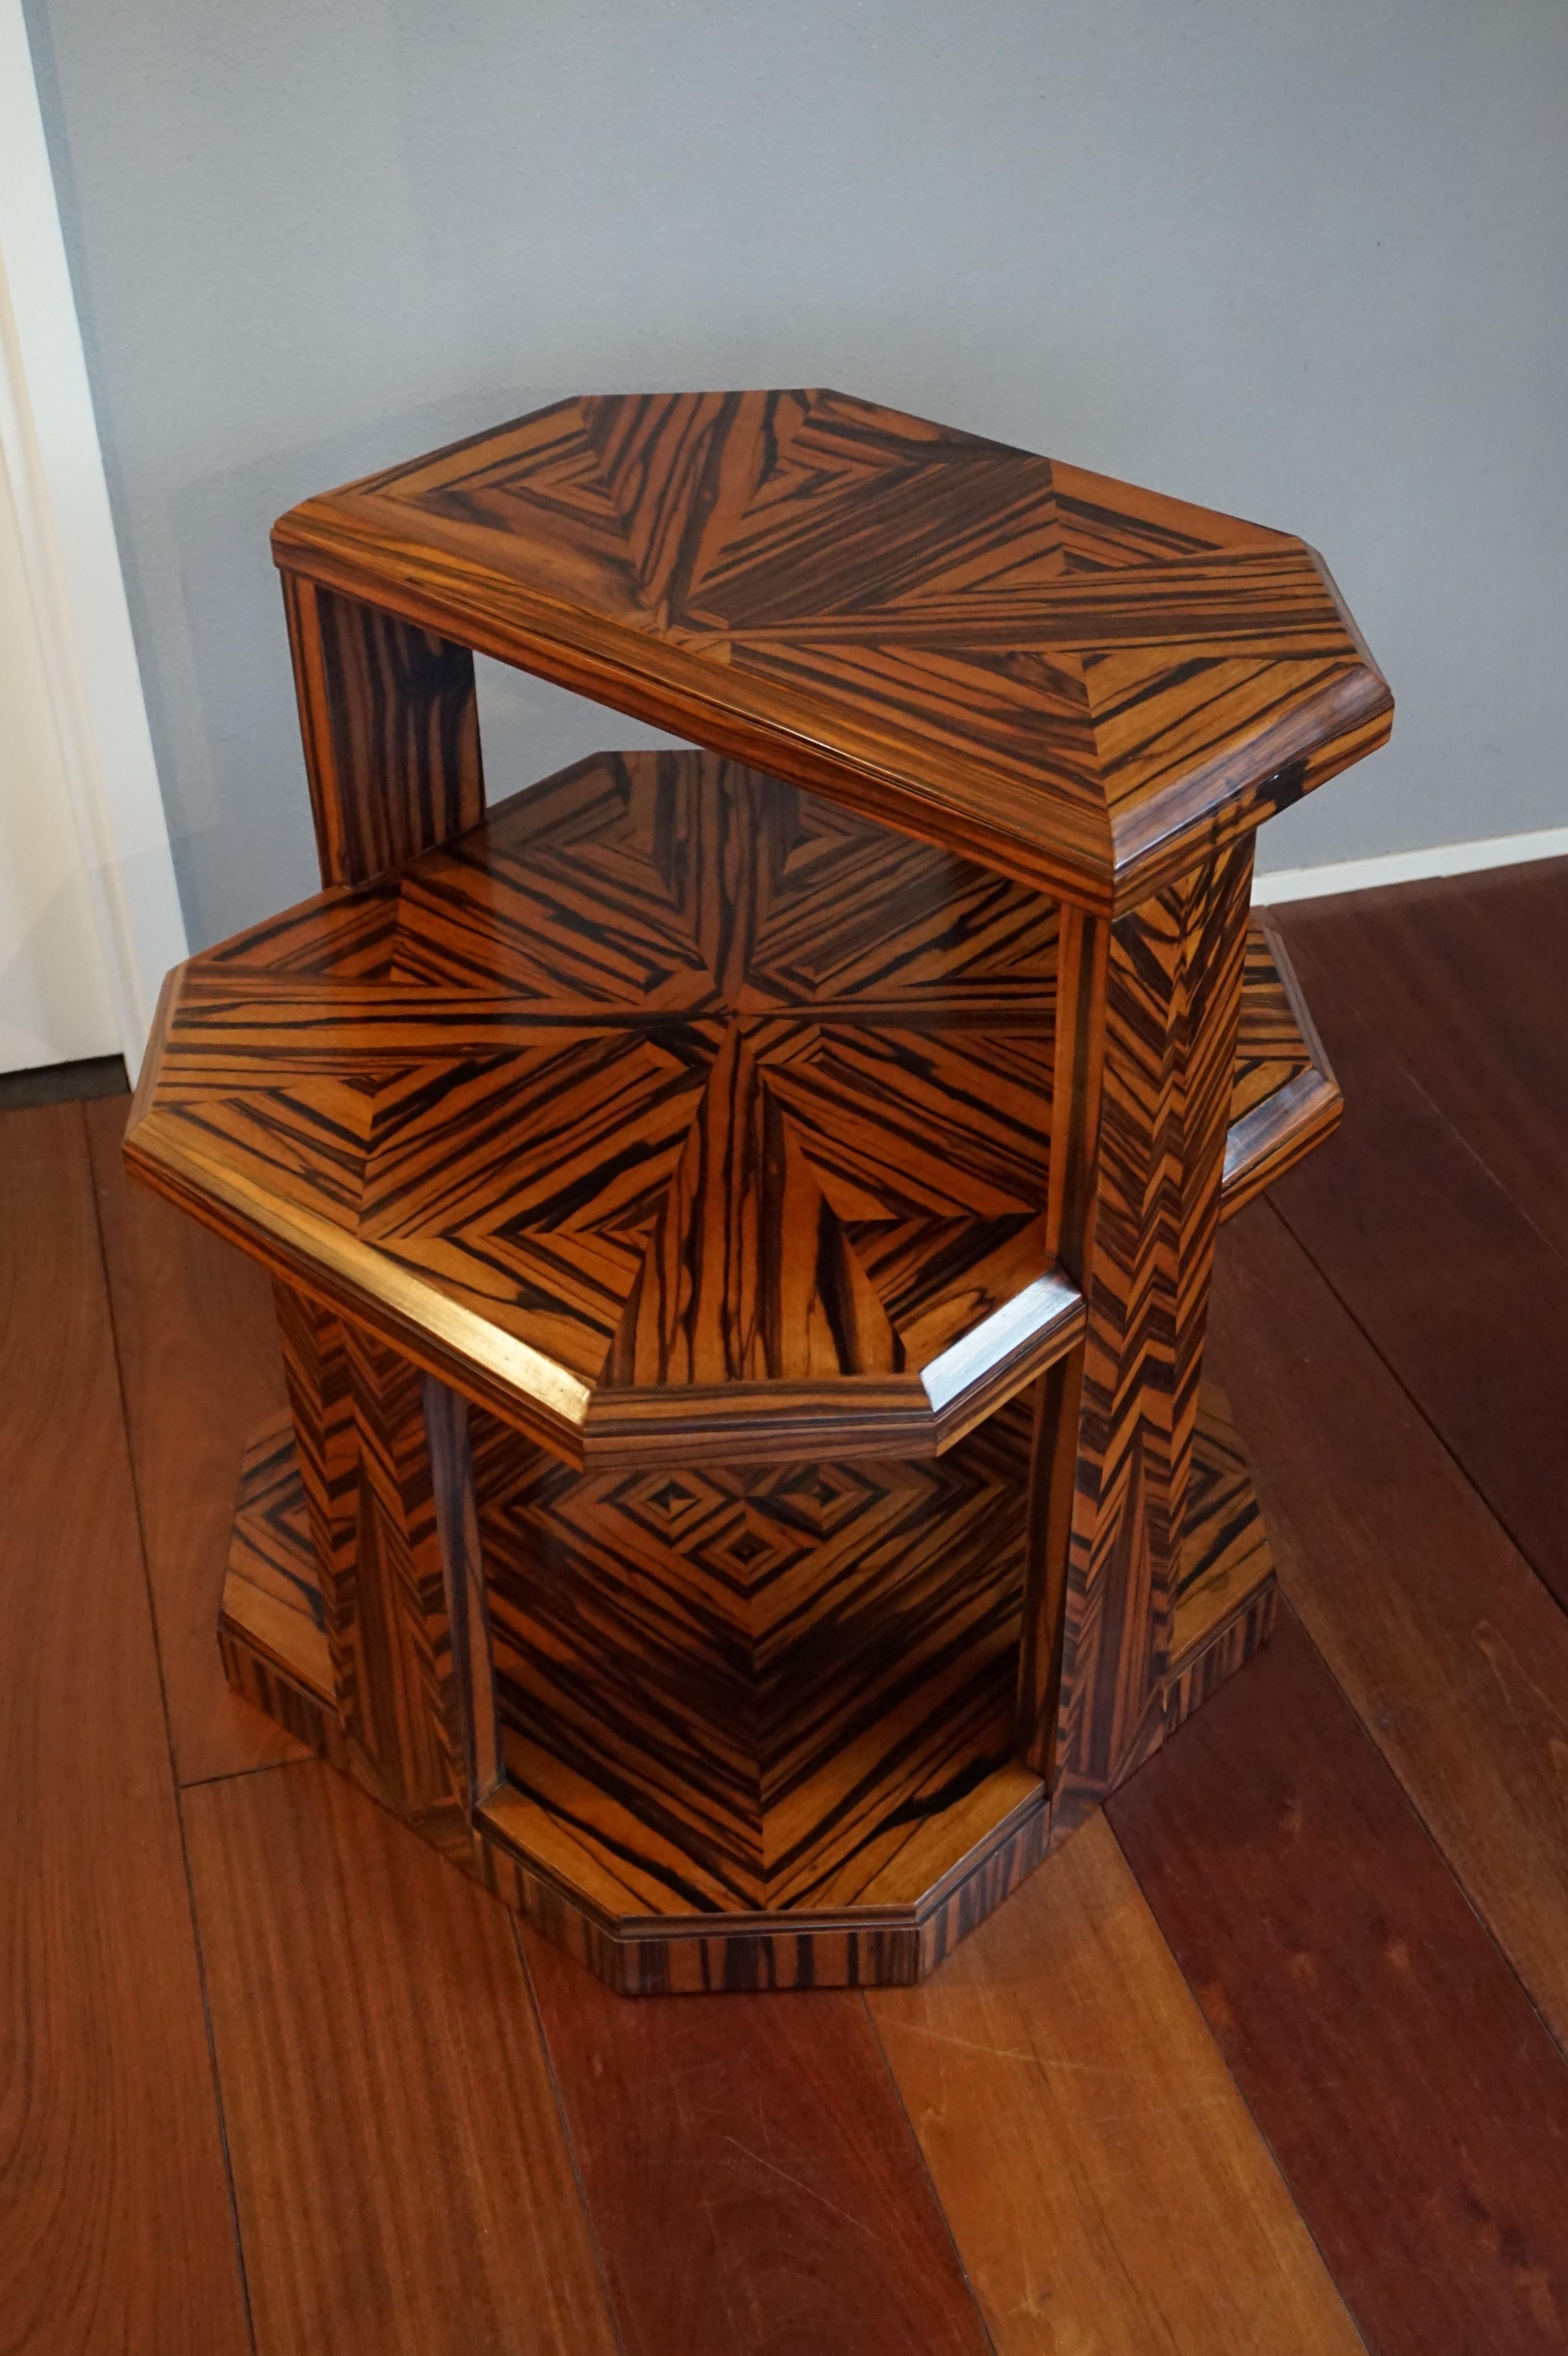 Marvellous Art Deco table with the wow-factor.

Antiques made of real Ceylon coromandel are a rare find. This Art Deco étagère is not only made of this striking, tropical wood, it is also inlaid with the most amazing geometrical motifs. In our view,